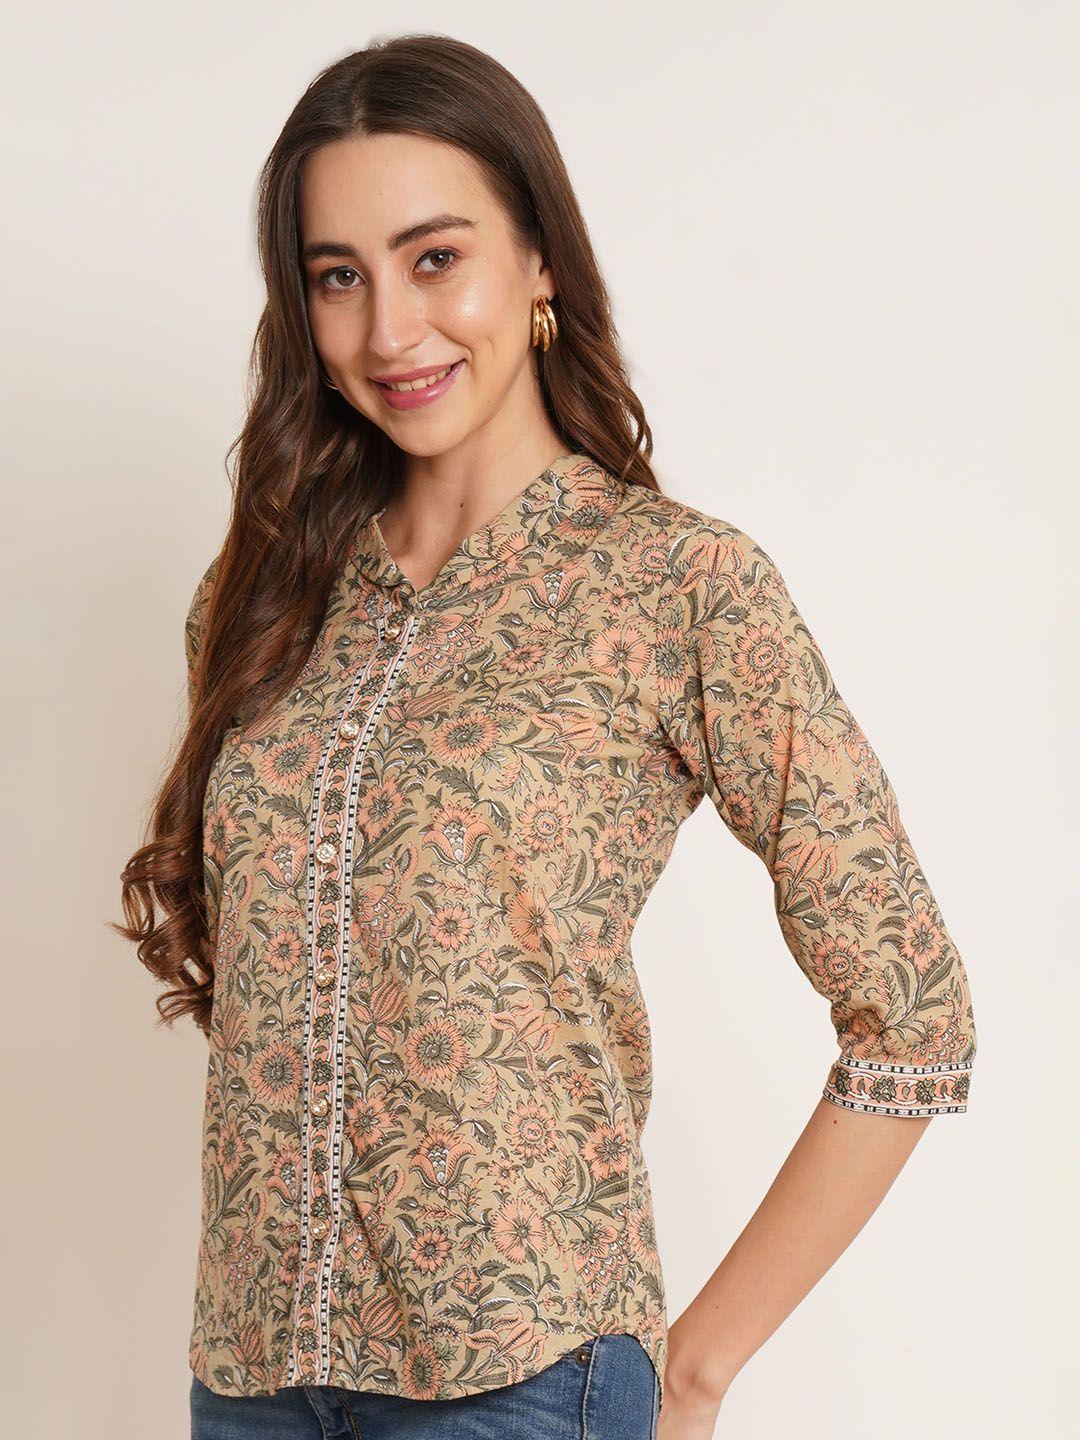 cotland-fashion-floral-printed-pure-cotton-shirt-style-top